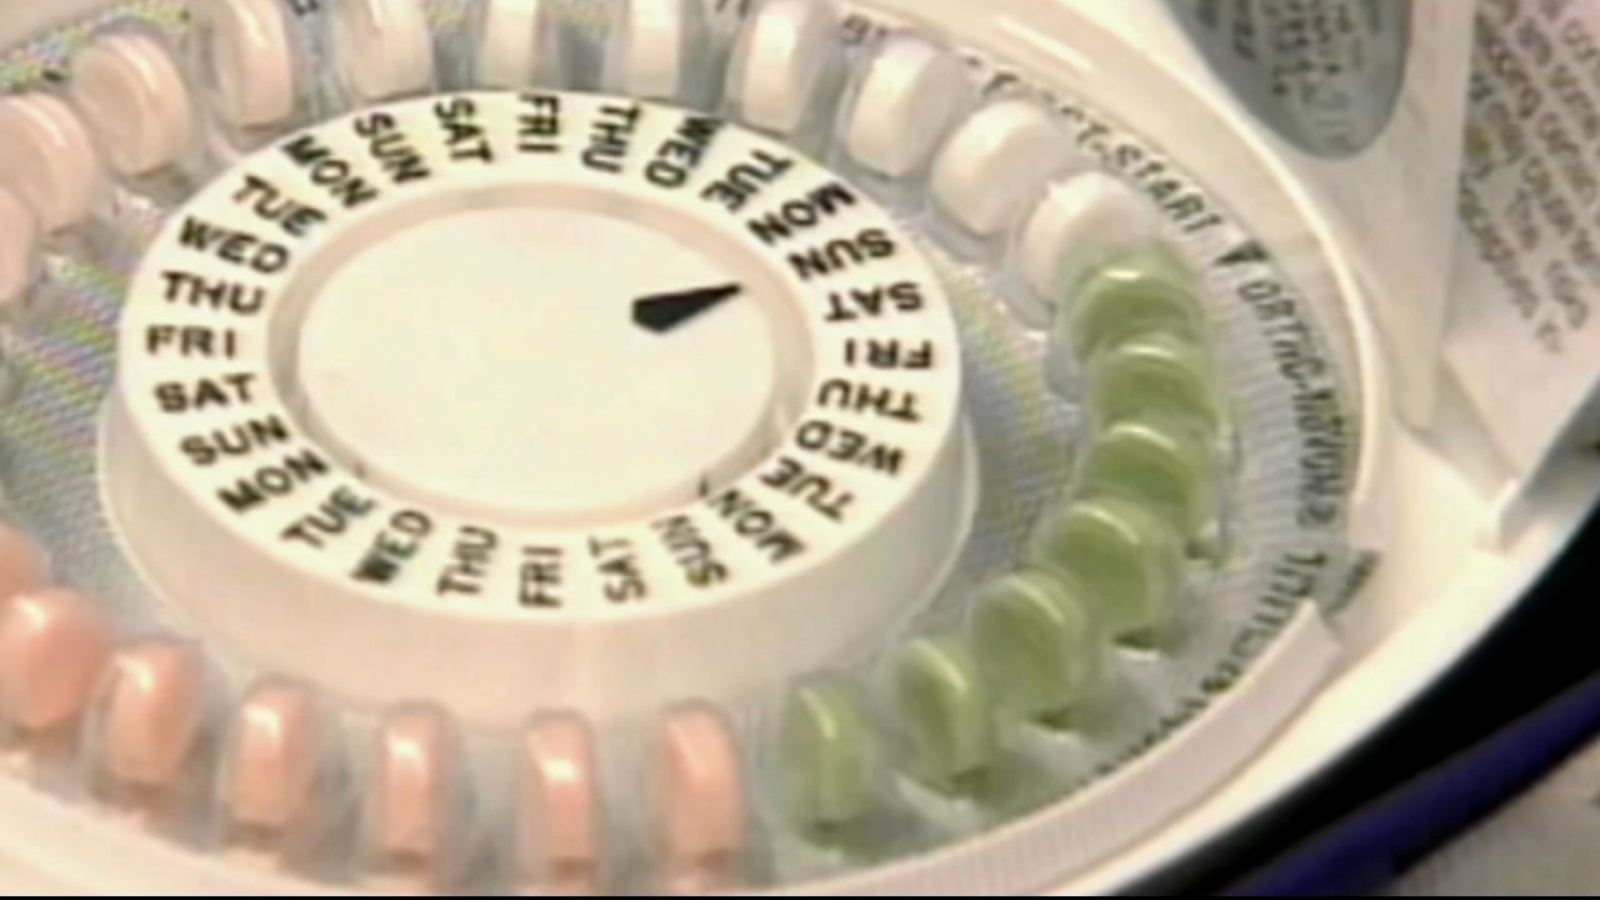   
																Pharmacies in New Jersey now allowed to sell birth control without a prescription 
															 